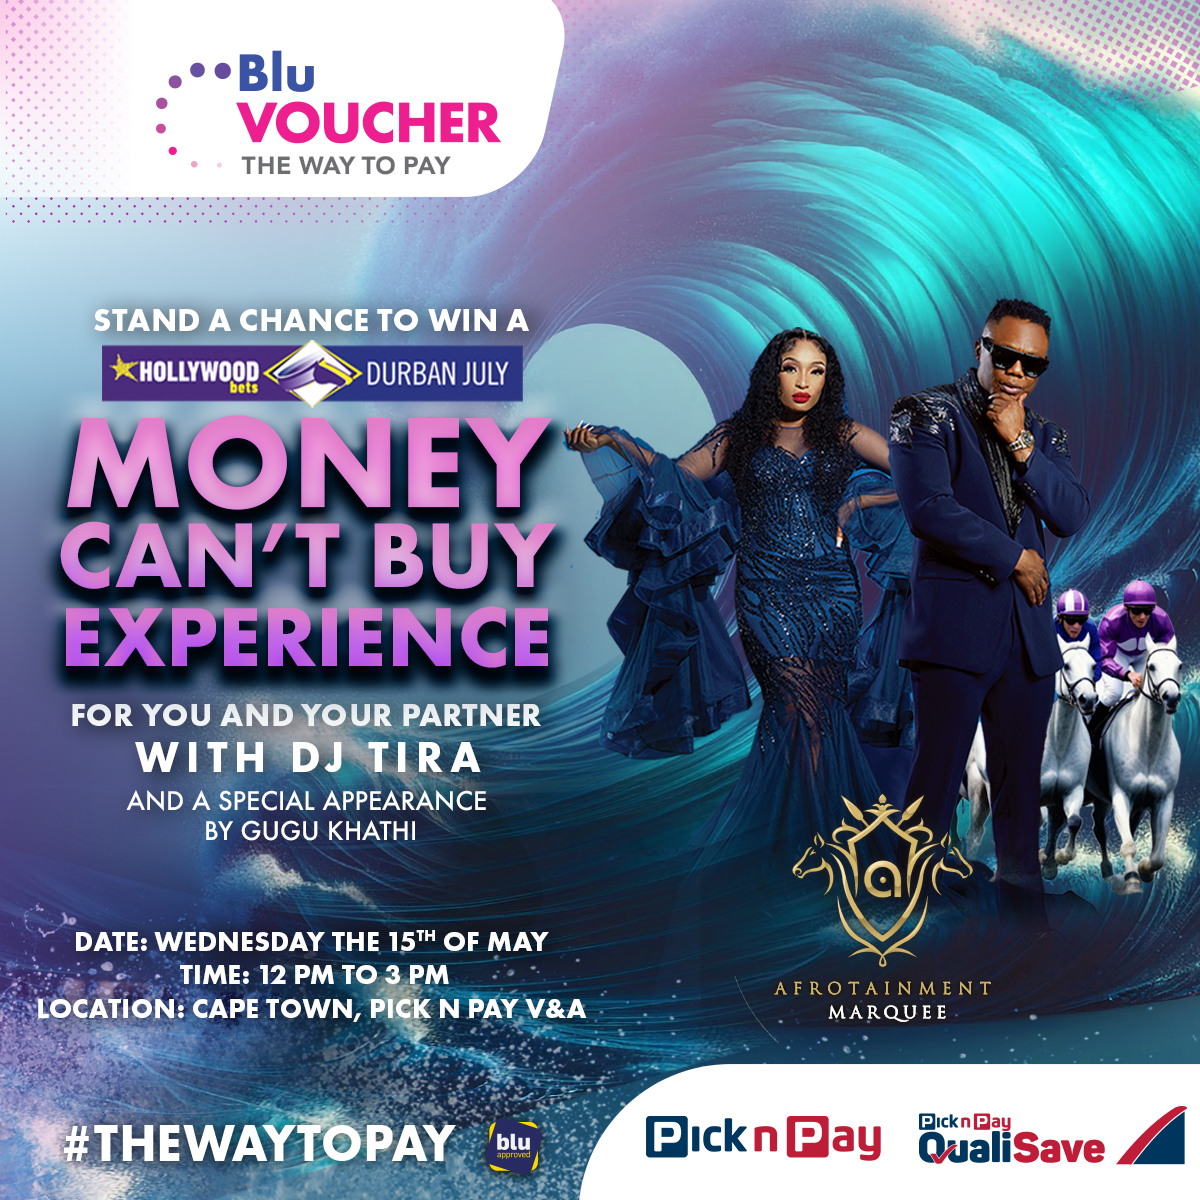 Have you entered the MONEY CAN’T BUY EXPERIENCE courtesy of Blu Voucher and DJ Tira? Here's your chance not only to meet DJ Tira and Gugu Khahti, but also to enter to win a pair of tickets for you and your friend to be treated like a VVIP at this year's Hollywoodbets Durban